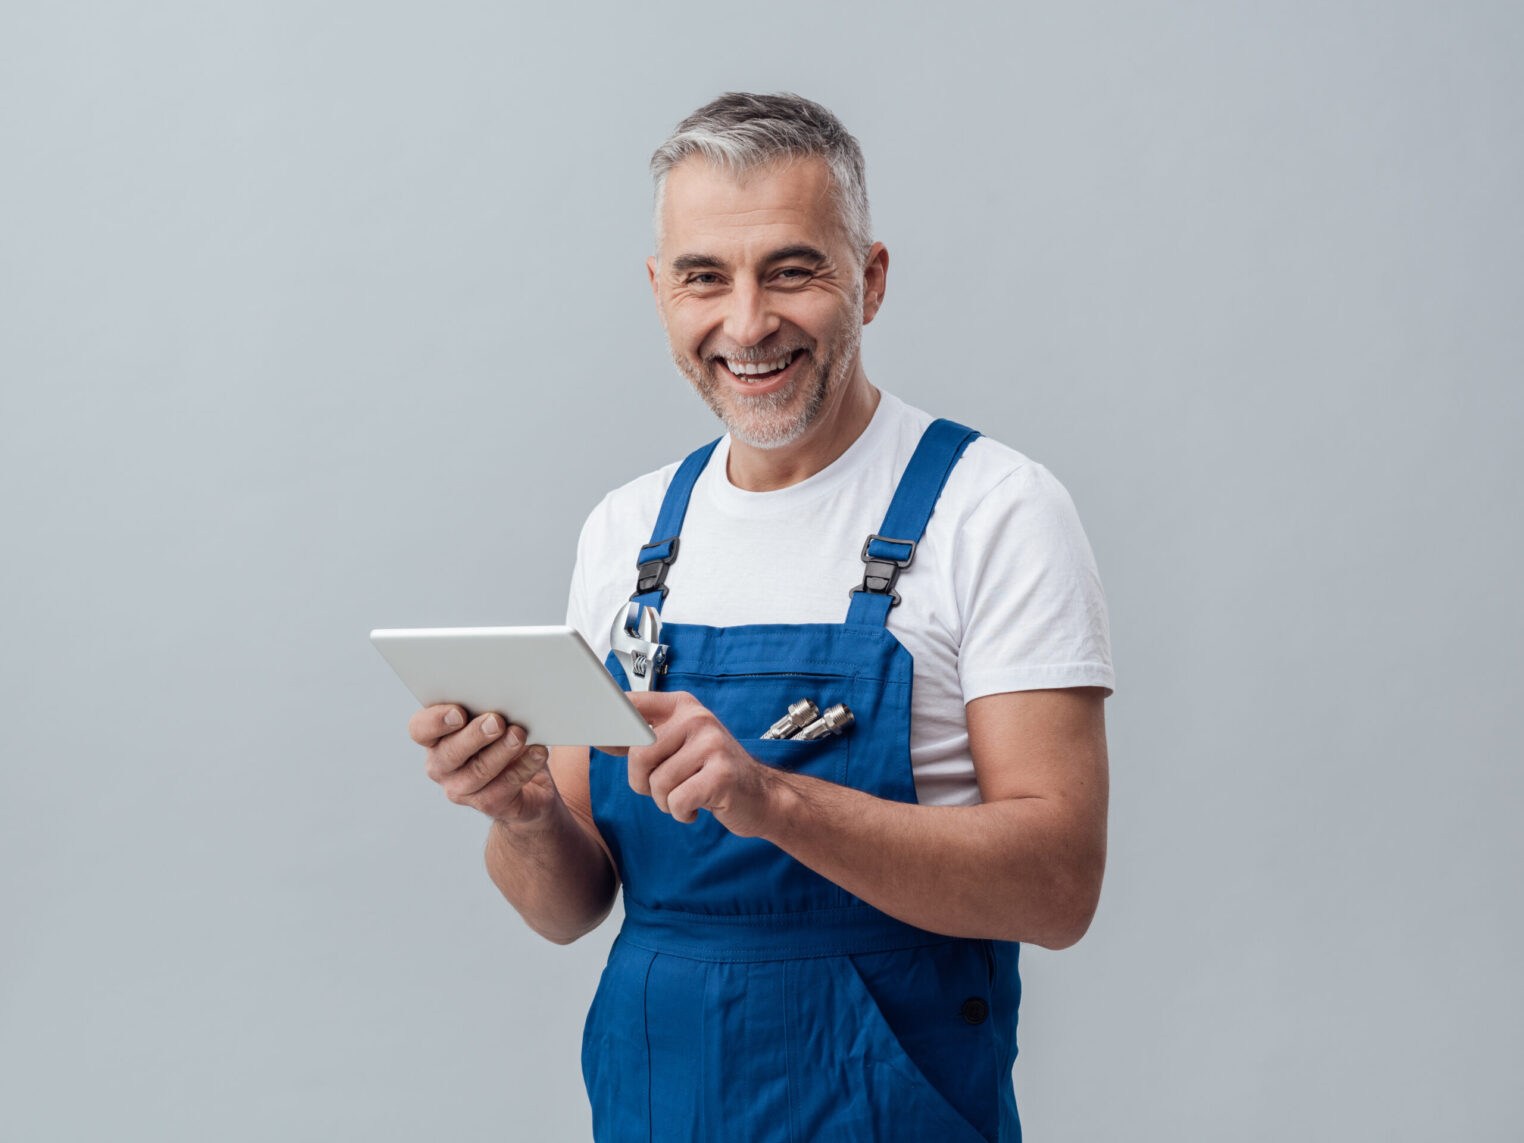 Plumber With A Tablet